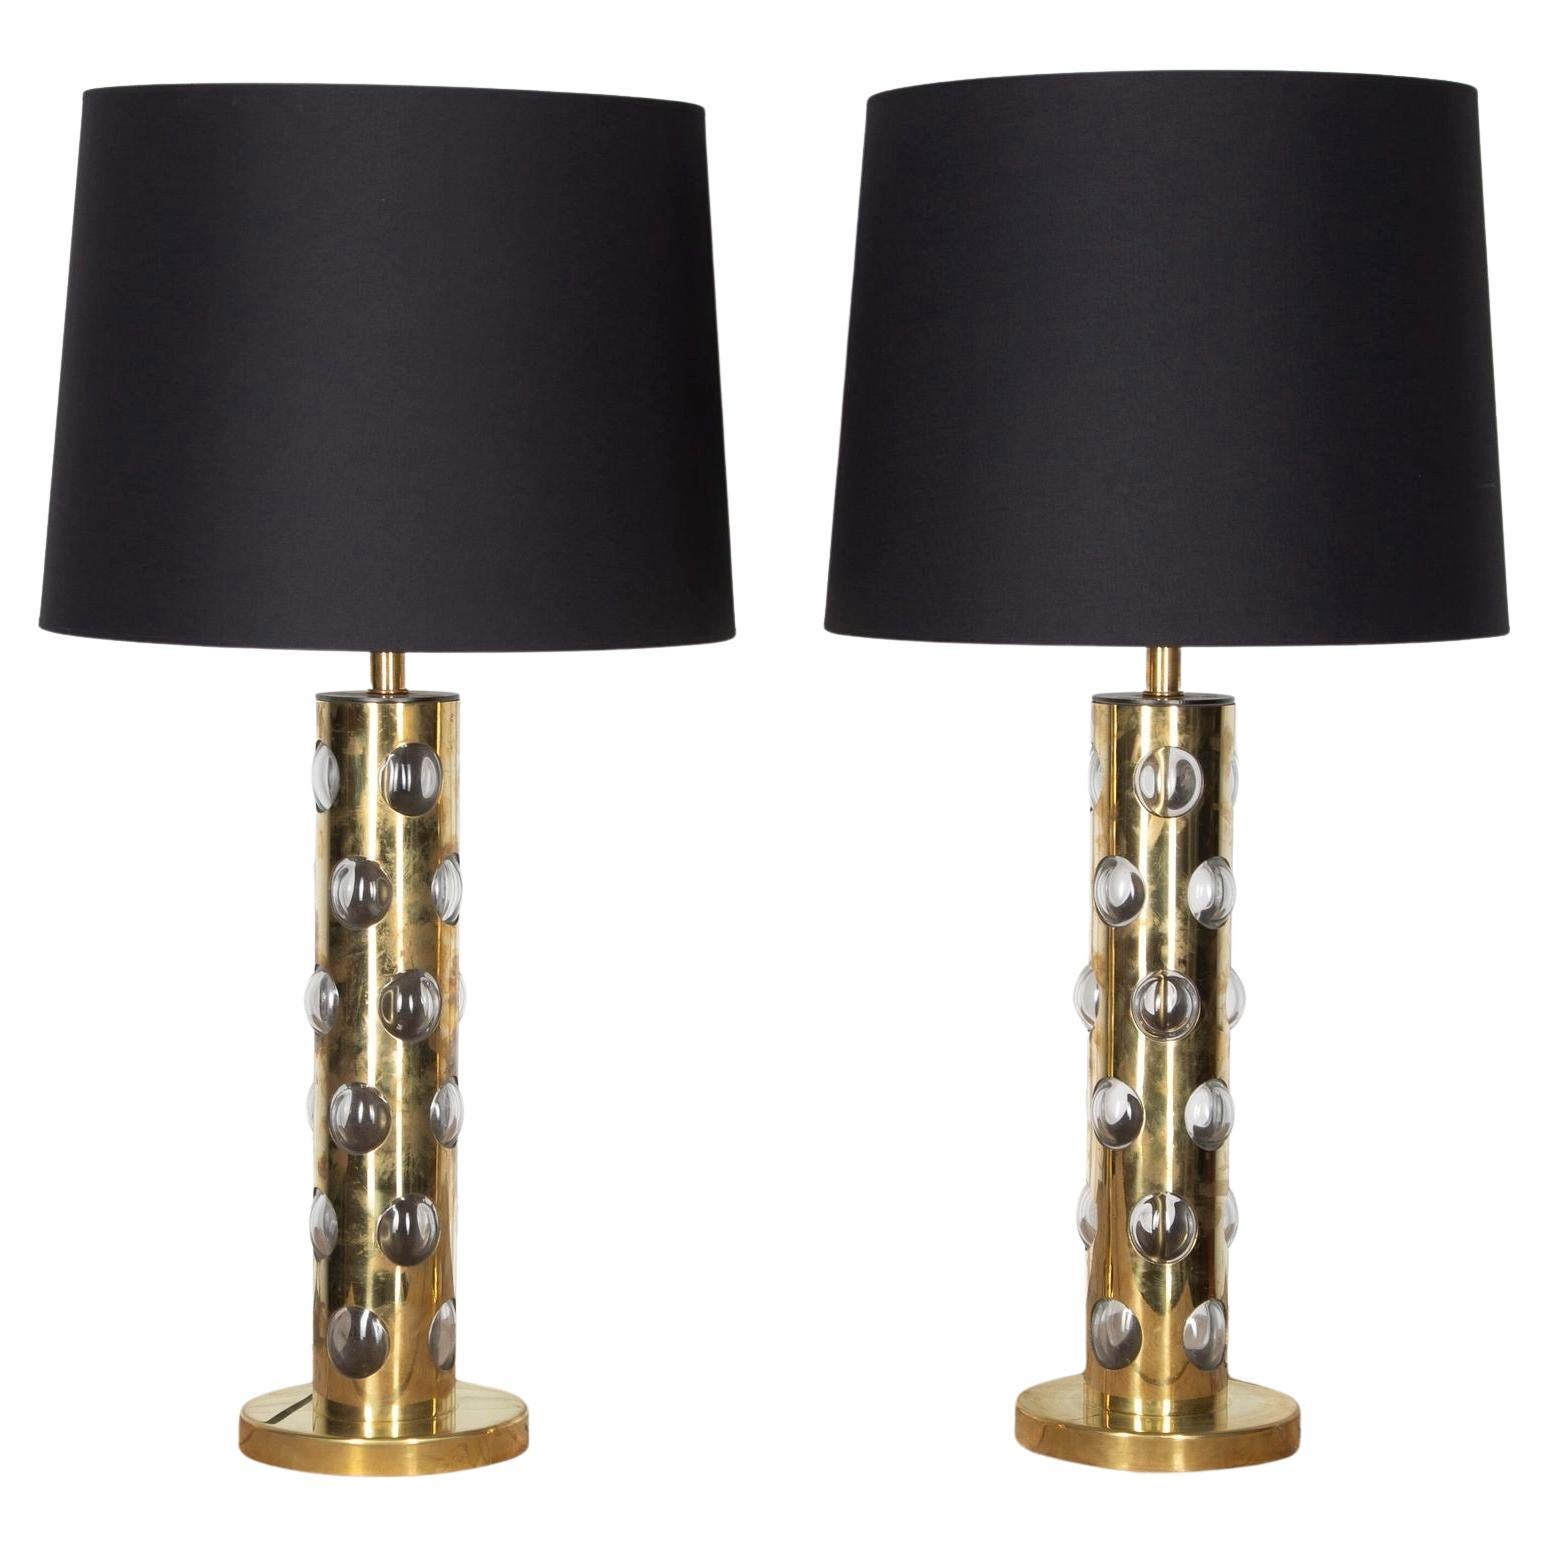 Pair of Italian Modernist Murano Glass Table Lamps For Sale